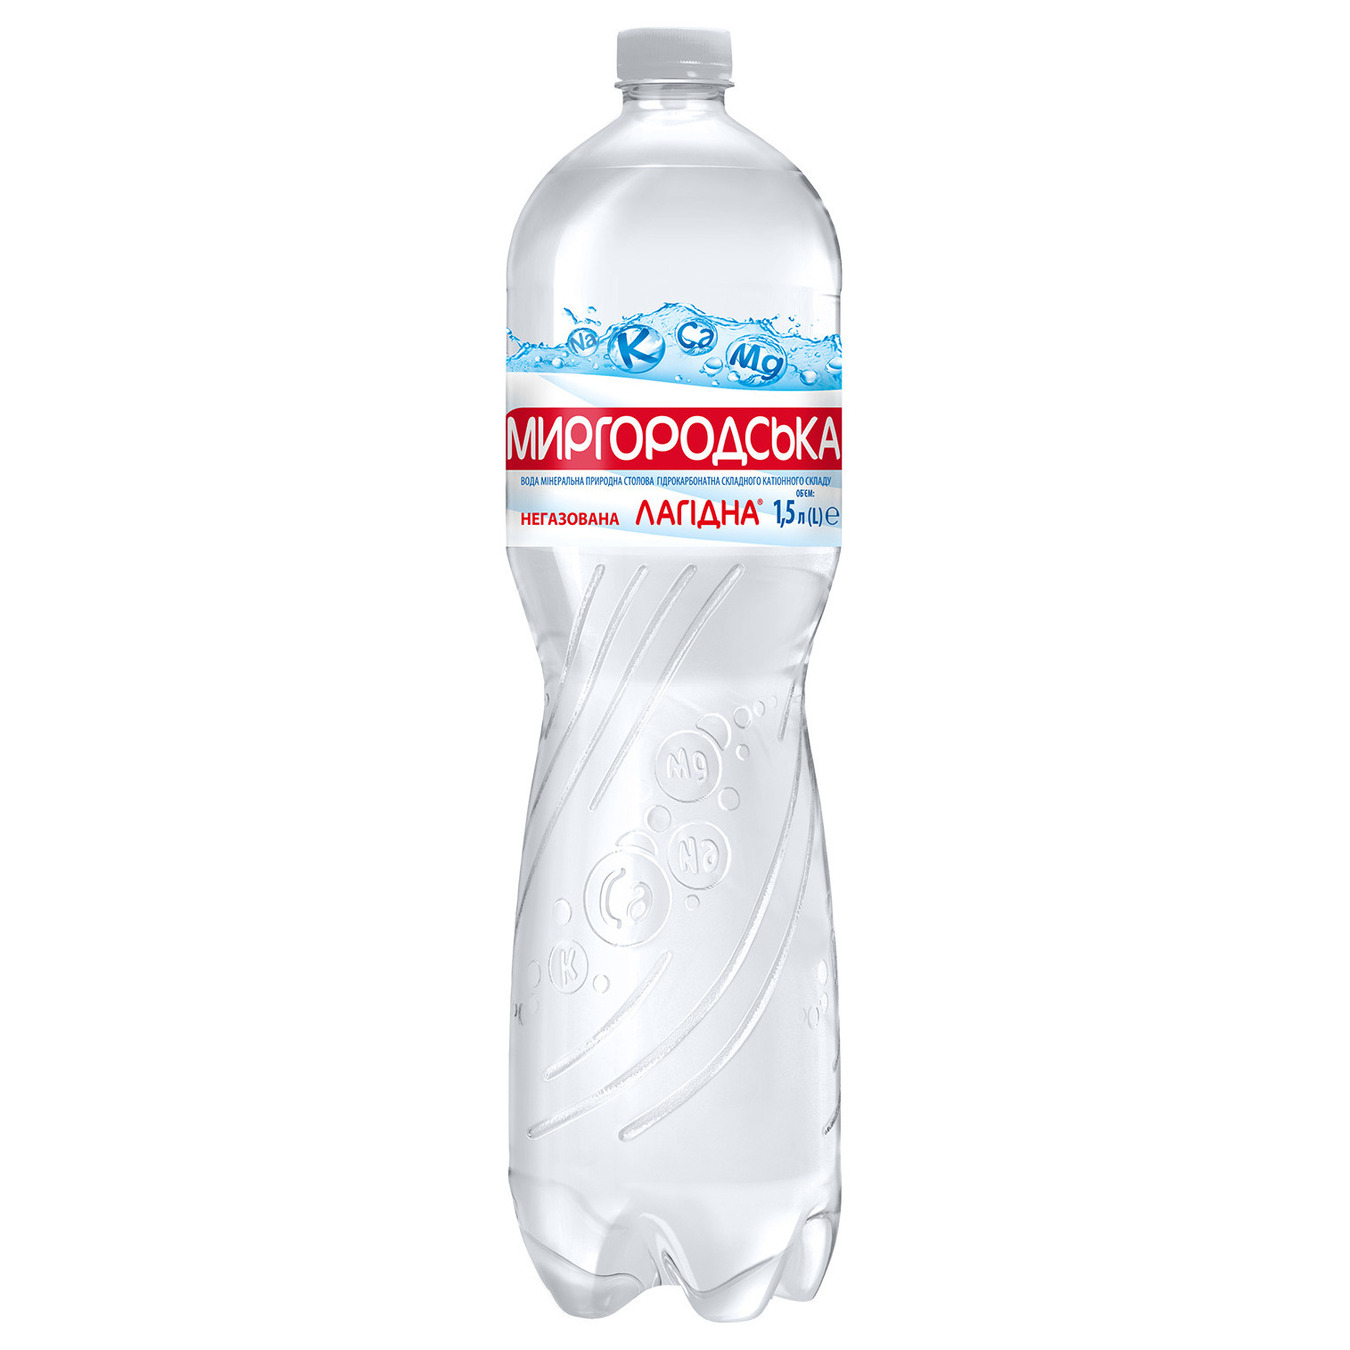 Myrhorodsʹka Gentle mineral non-carbonated Water 1,5l